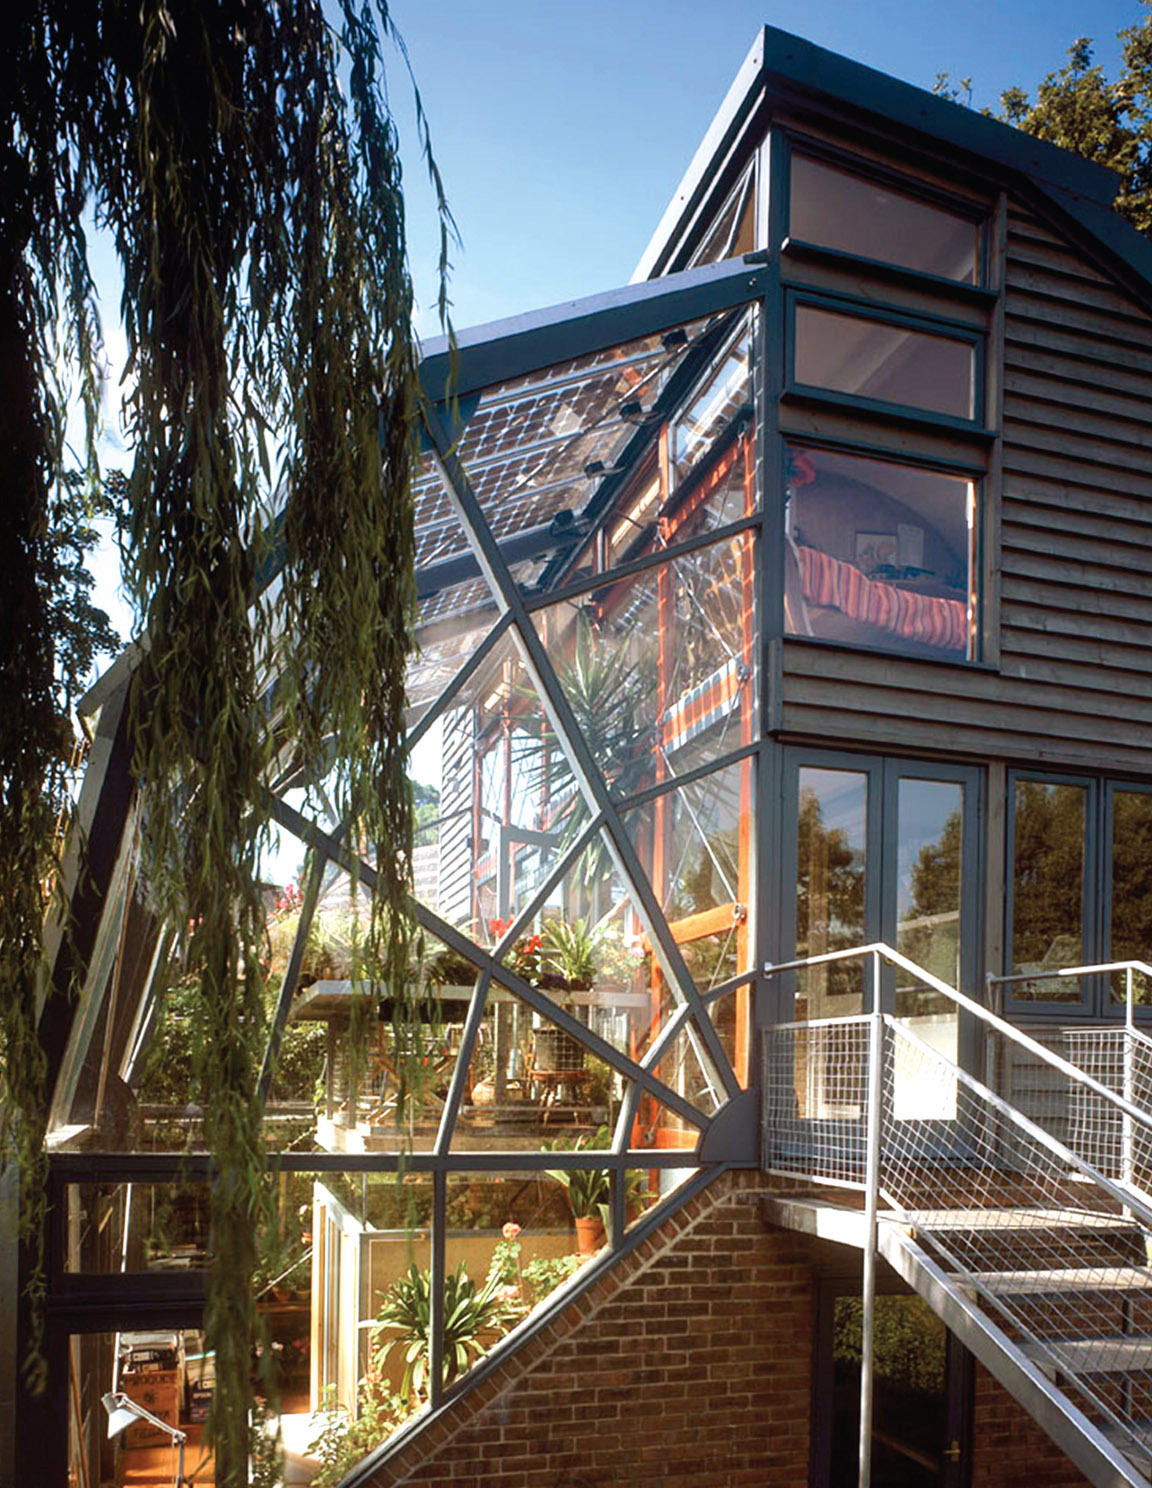 2.1 Hope House, the first experimental ‘ZED’ (1995). An automated pellet boiler for domestic hot water in winter, evacuated tube solar thermal collectors providing all hot water from late spring to early autumn and a 1.1 kW peak photovoltaic array.